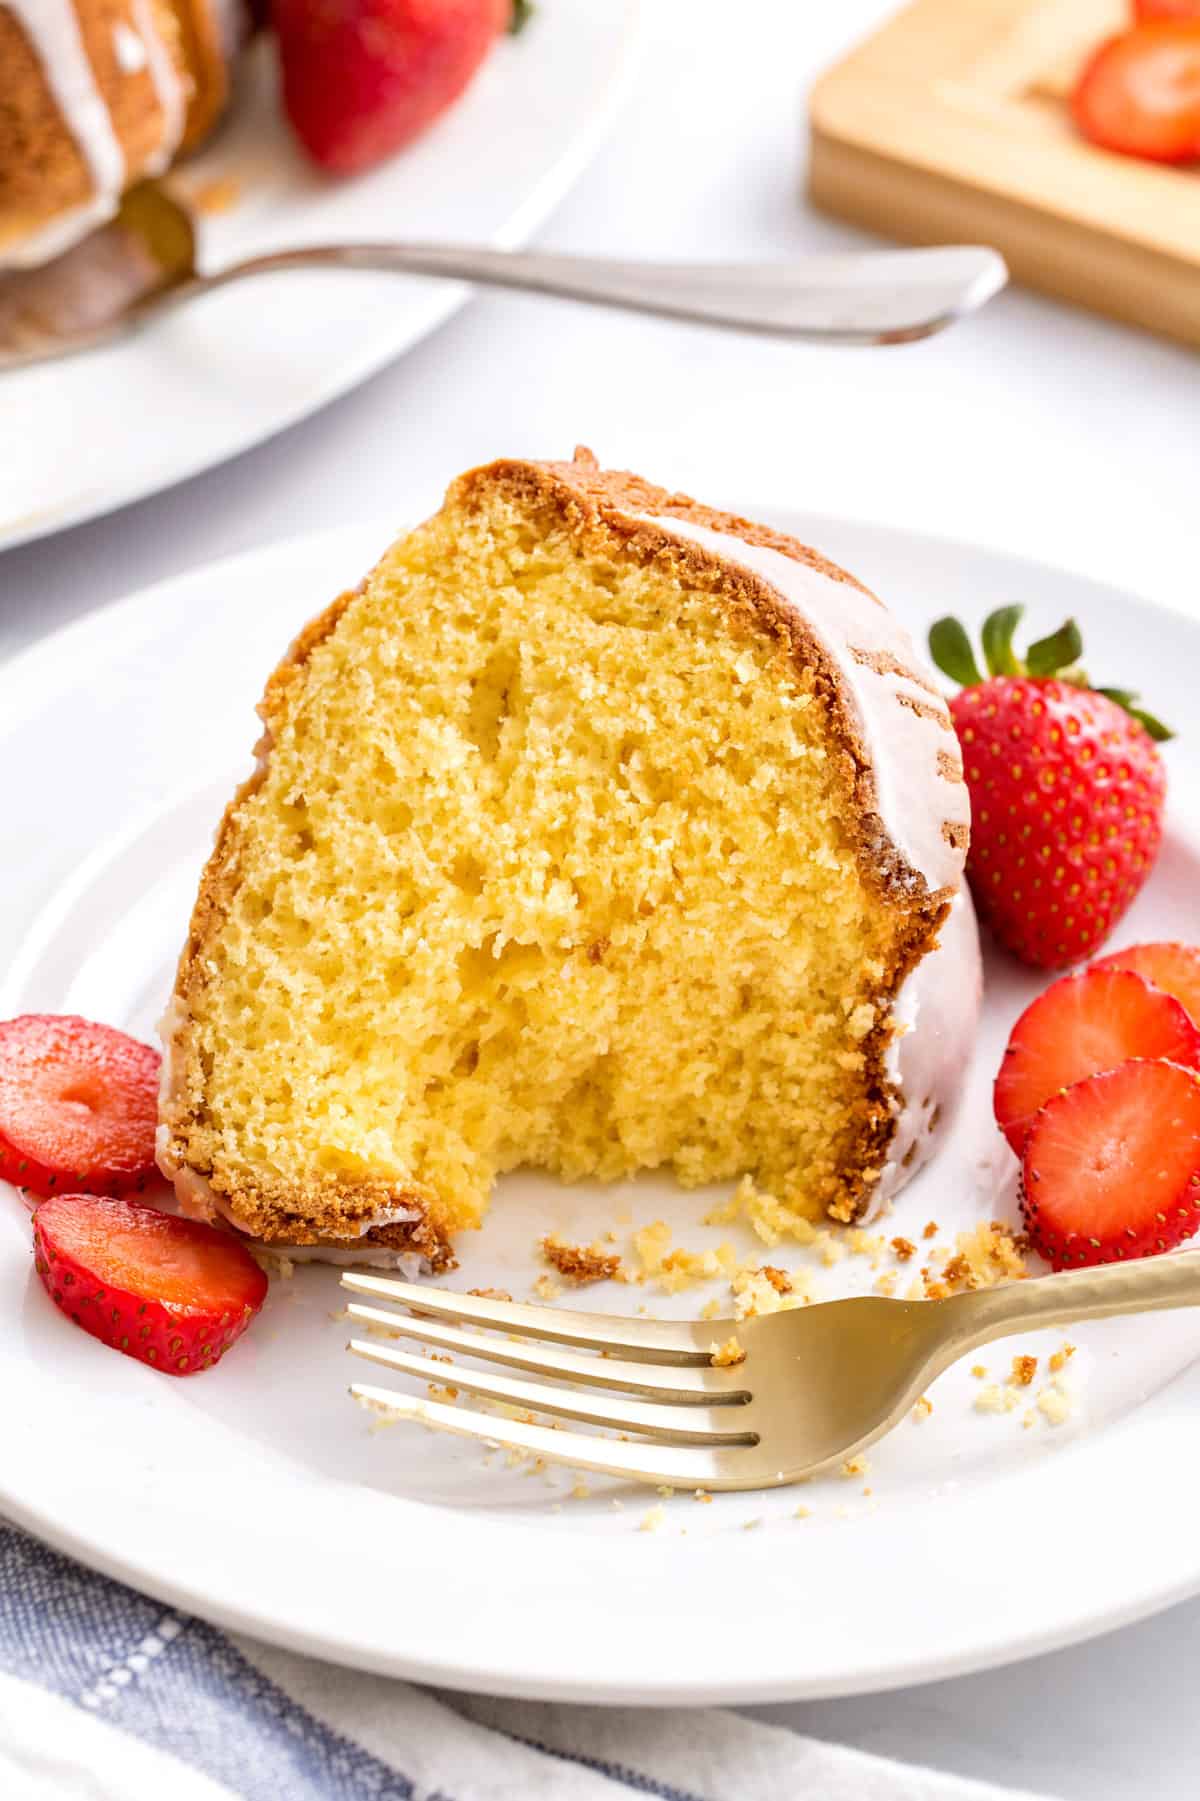 slice of cake mix pound cake served on a white round plate with cut fresh strawberries on the side